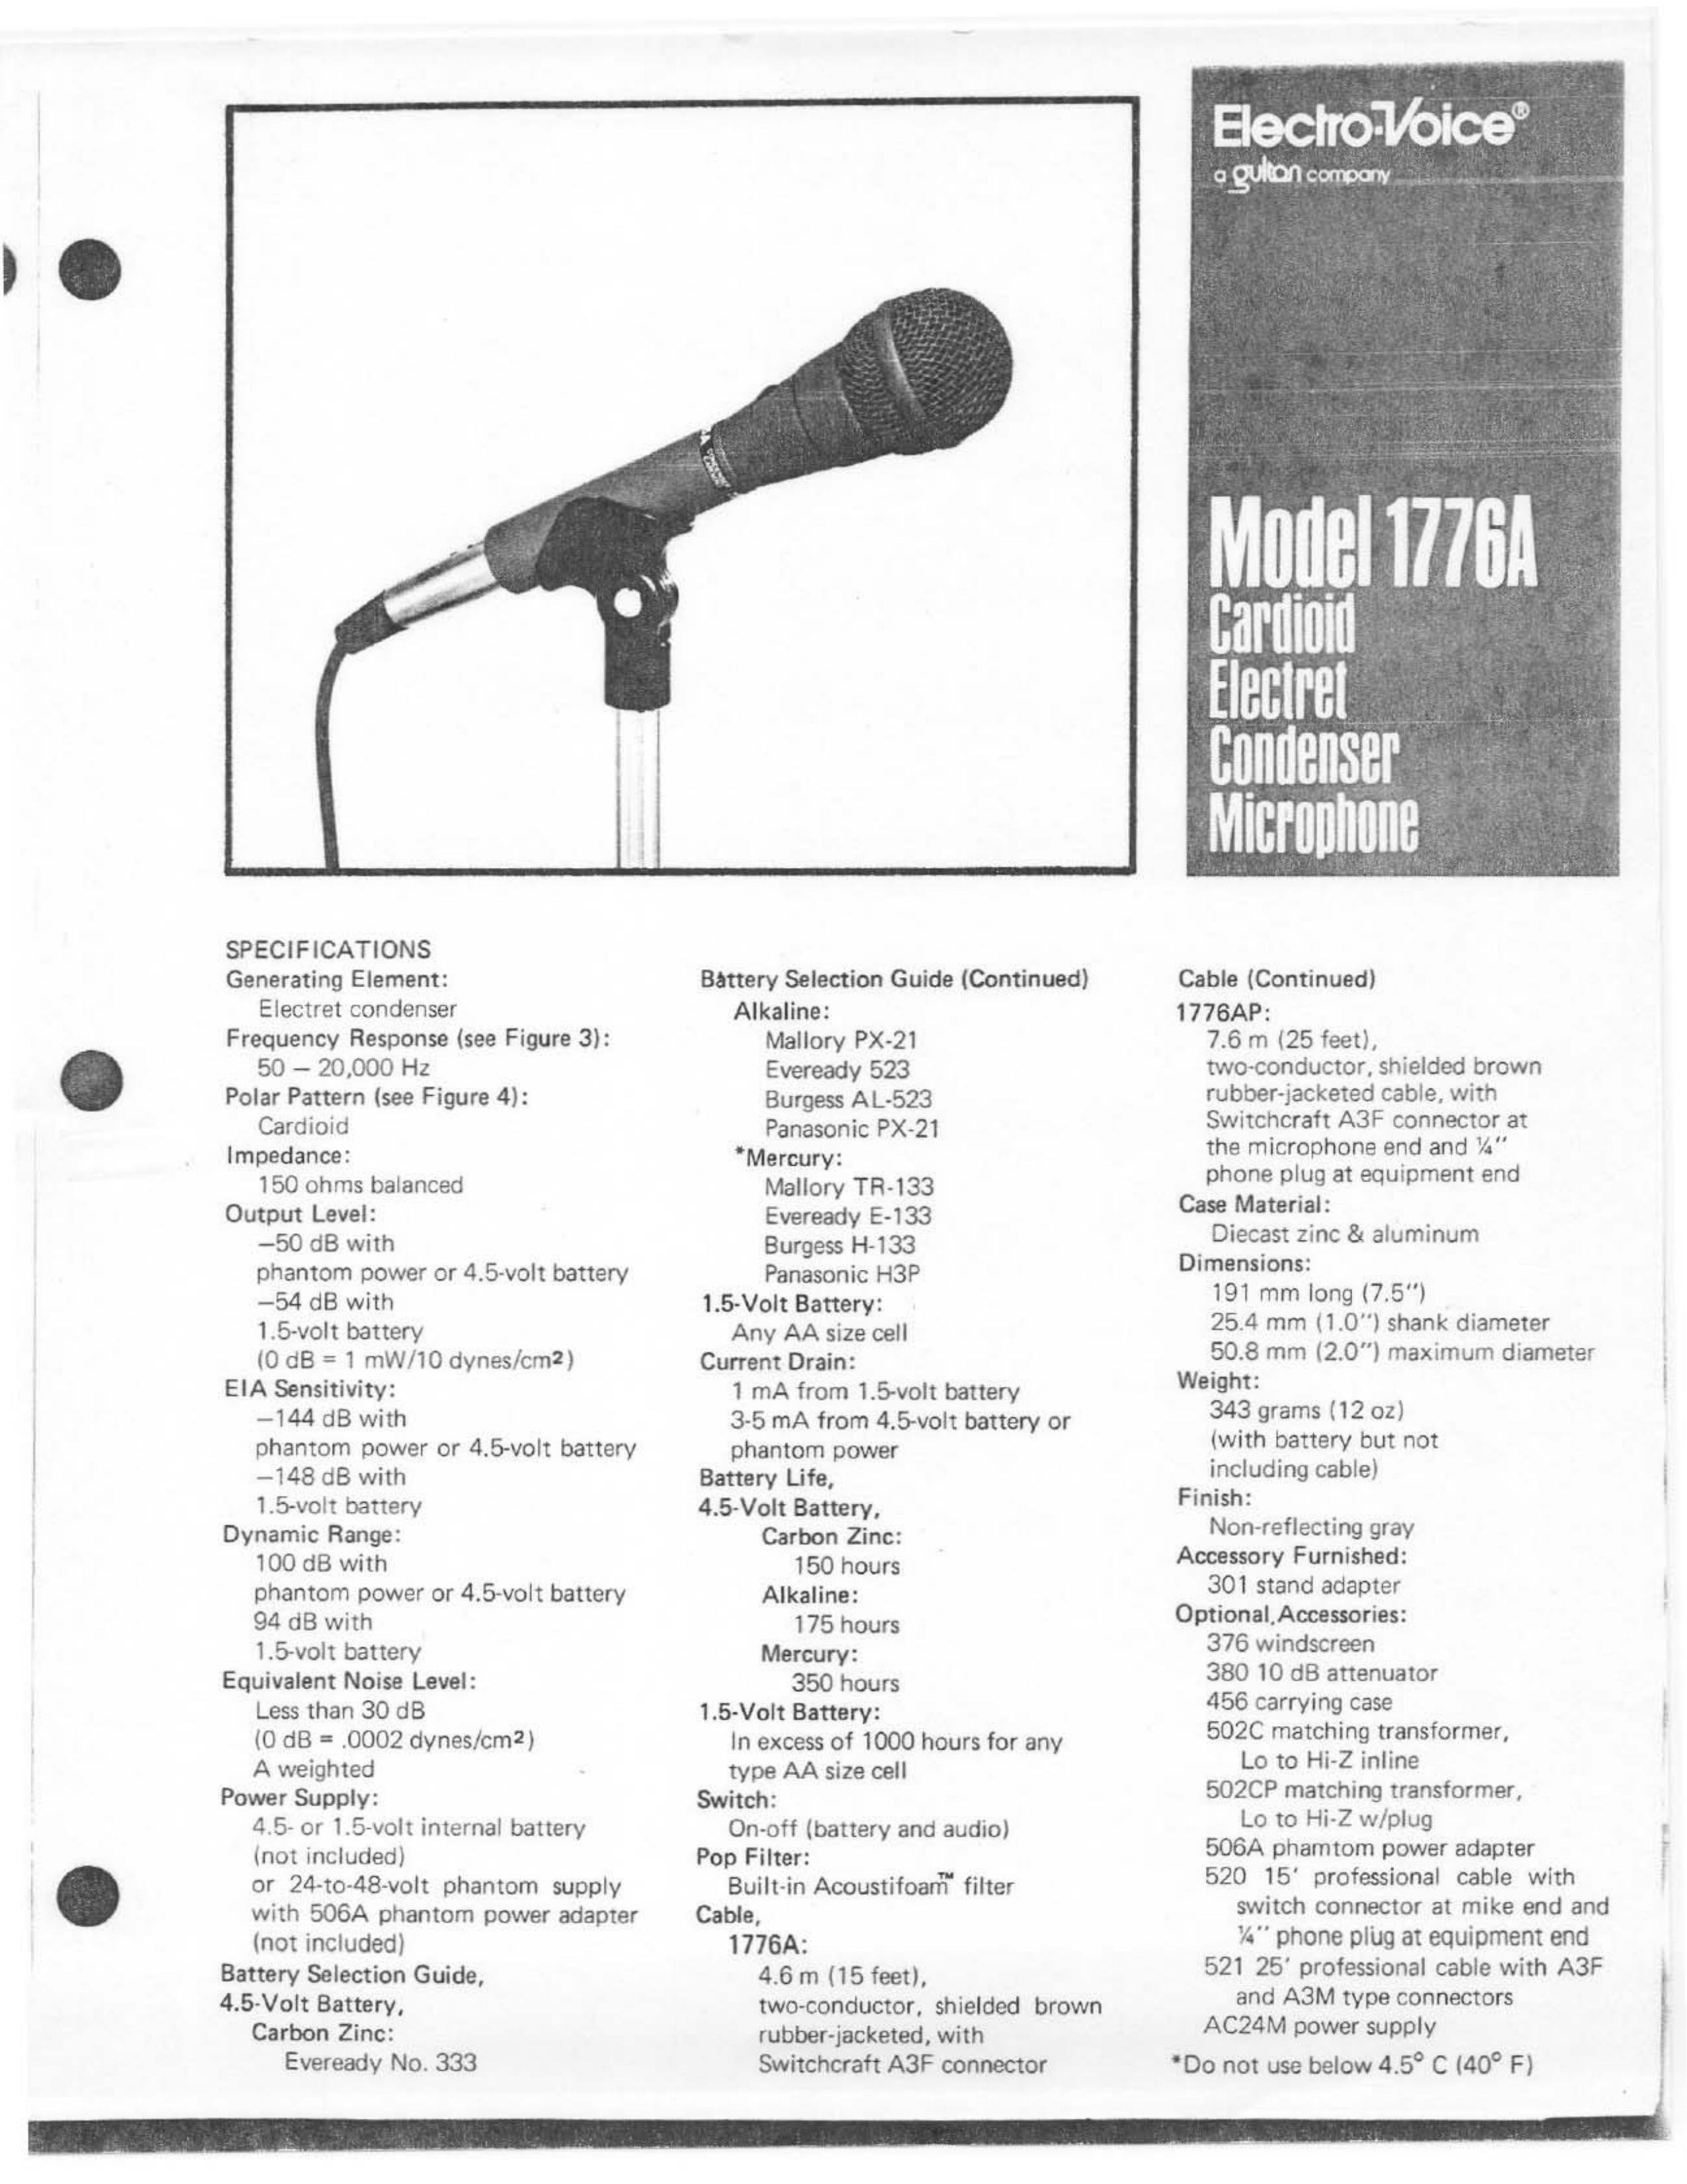 Electro-Voice 1776A Microphone User Manual